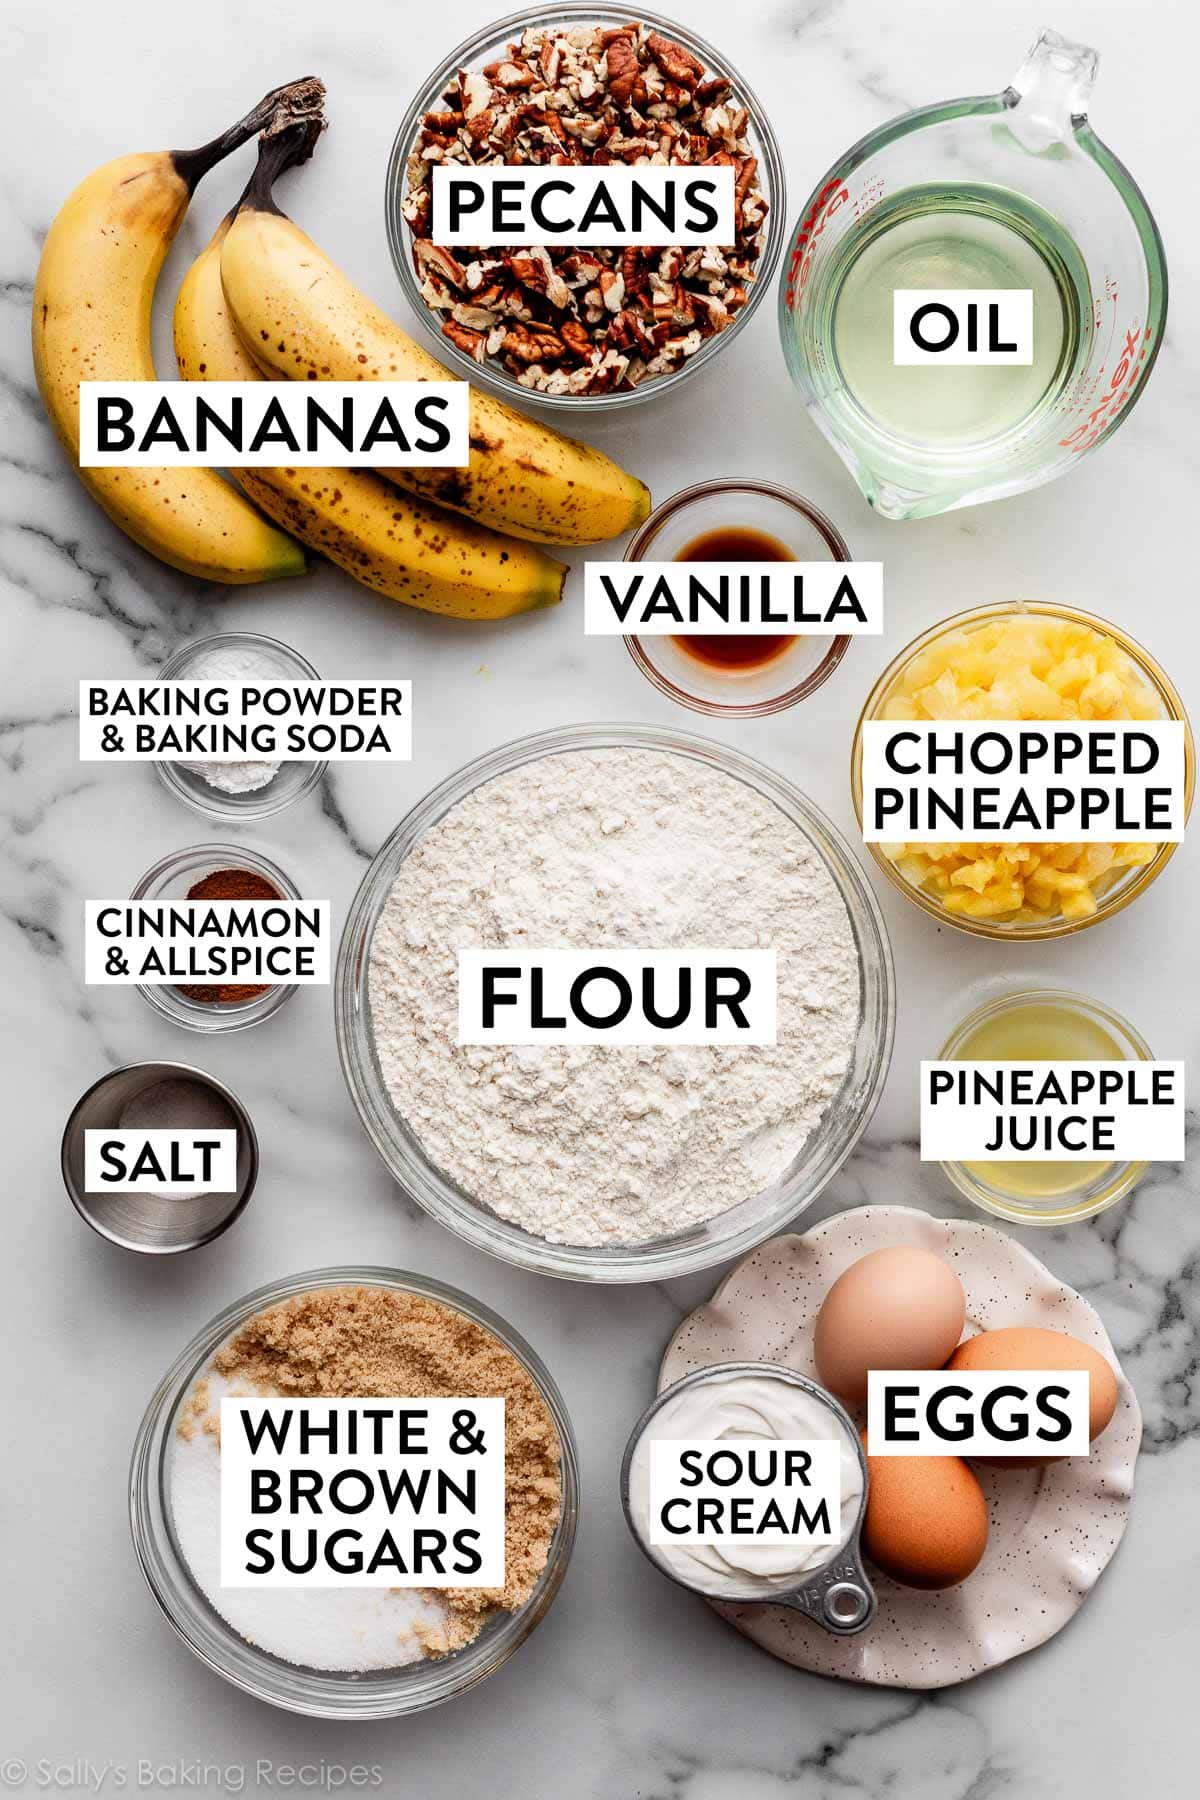 ingredients on counter including pineapple, banana, oil, pecans, vanilla, eggs, sour cream, and sugars.